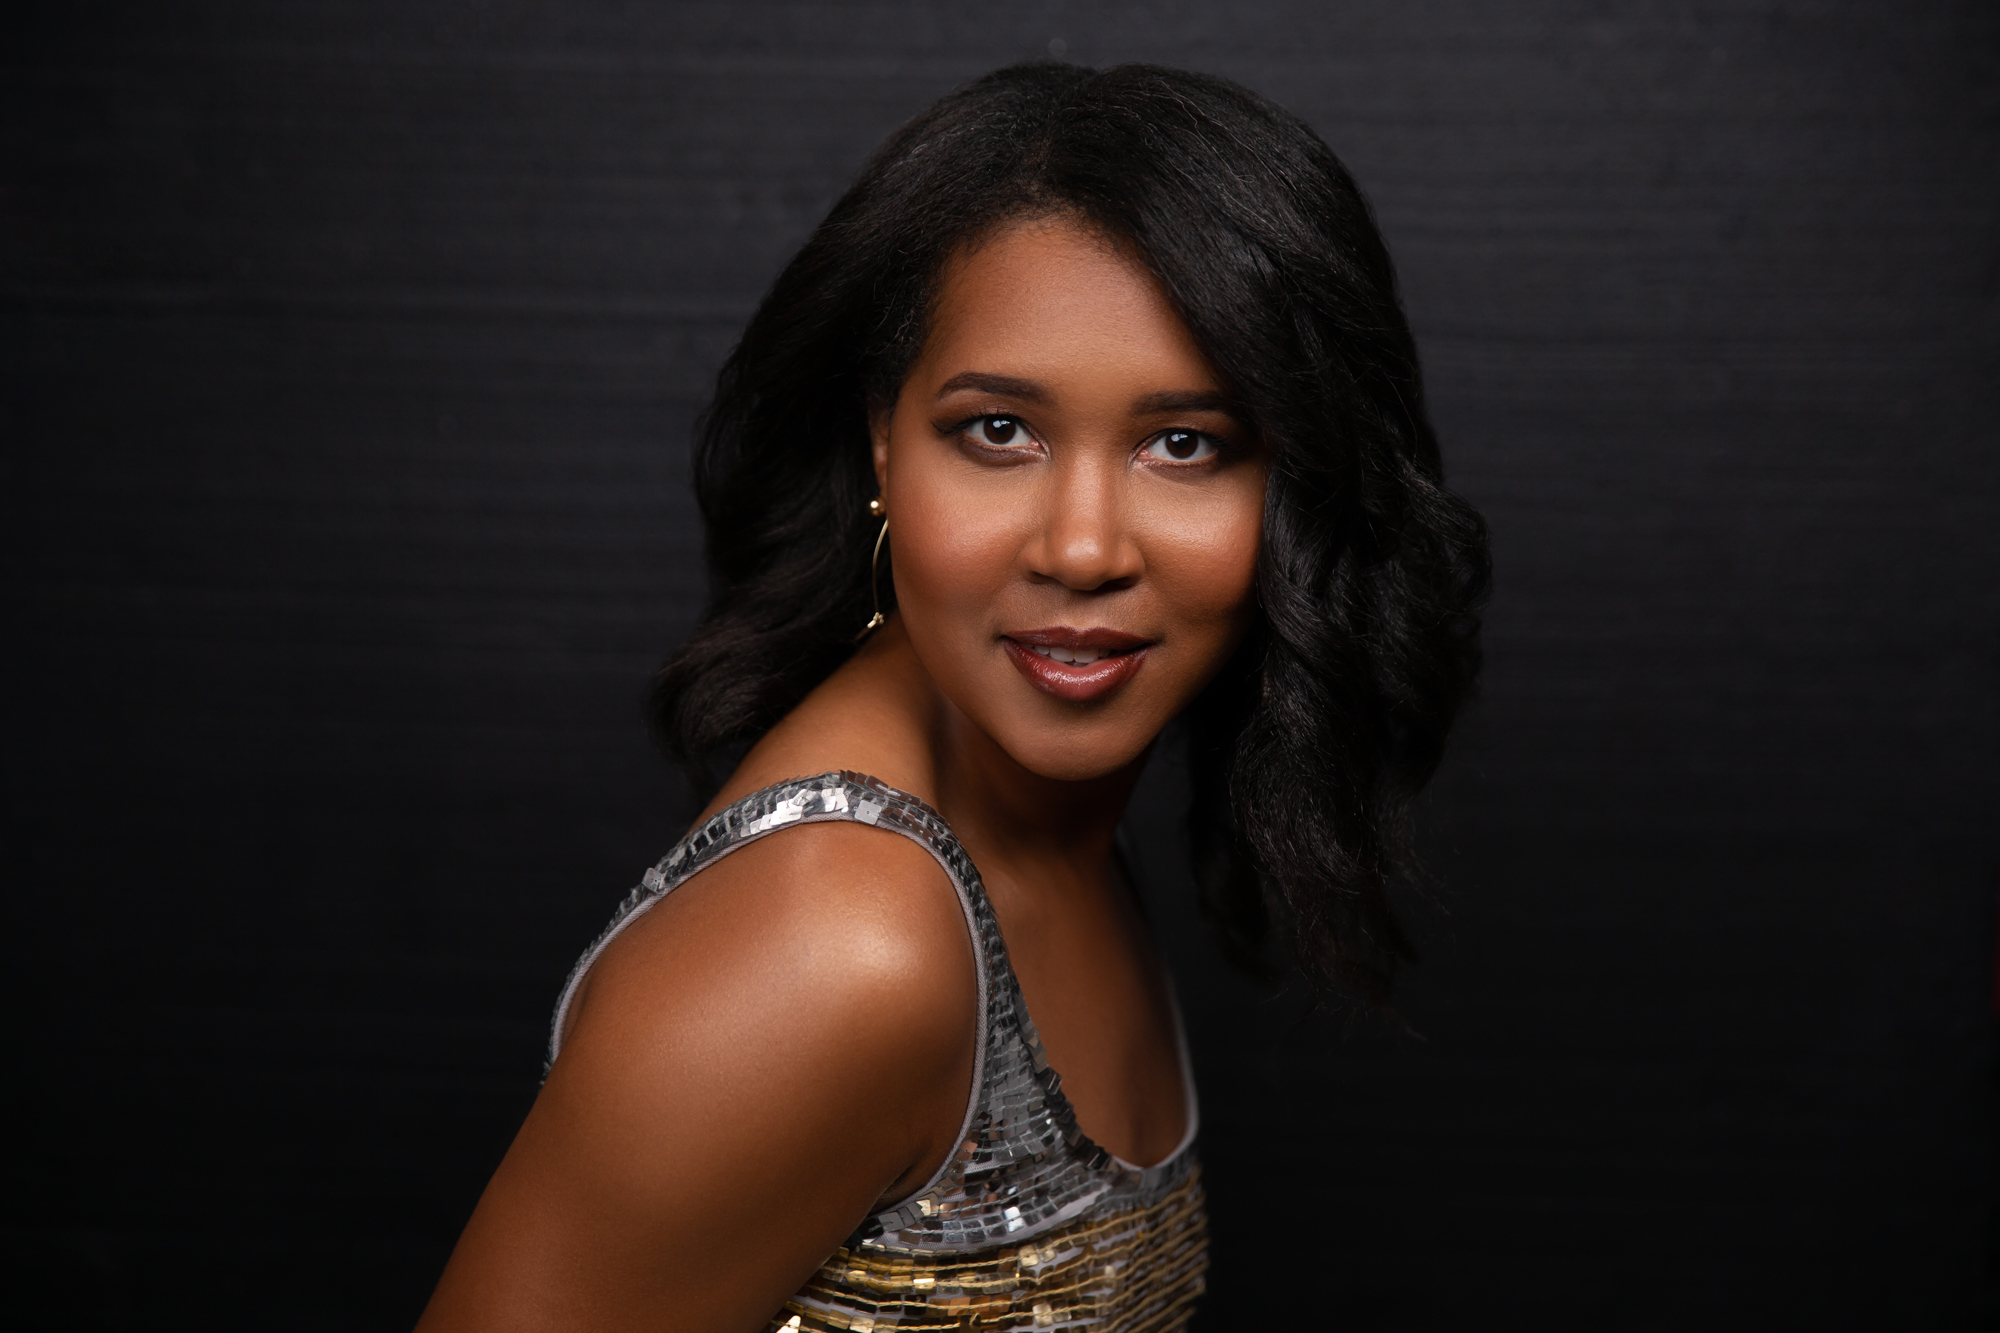 African -American Woman with her head tilted to the side - as she sits sideways in a gold/silver sequin dress. Her hair is adorning her shoulders and she has neutral make-up. She is smiling slightly and is on a black photo background